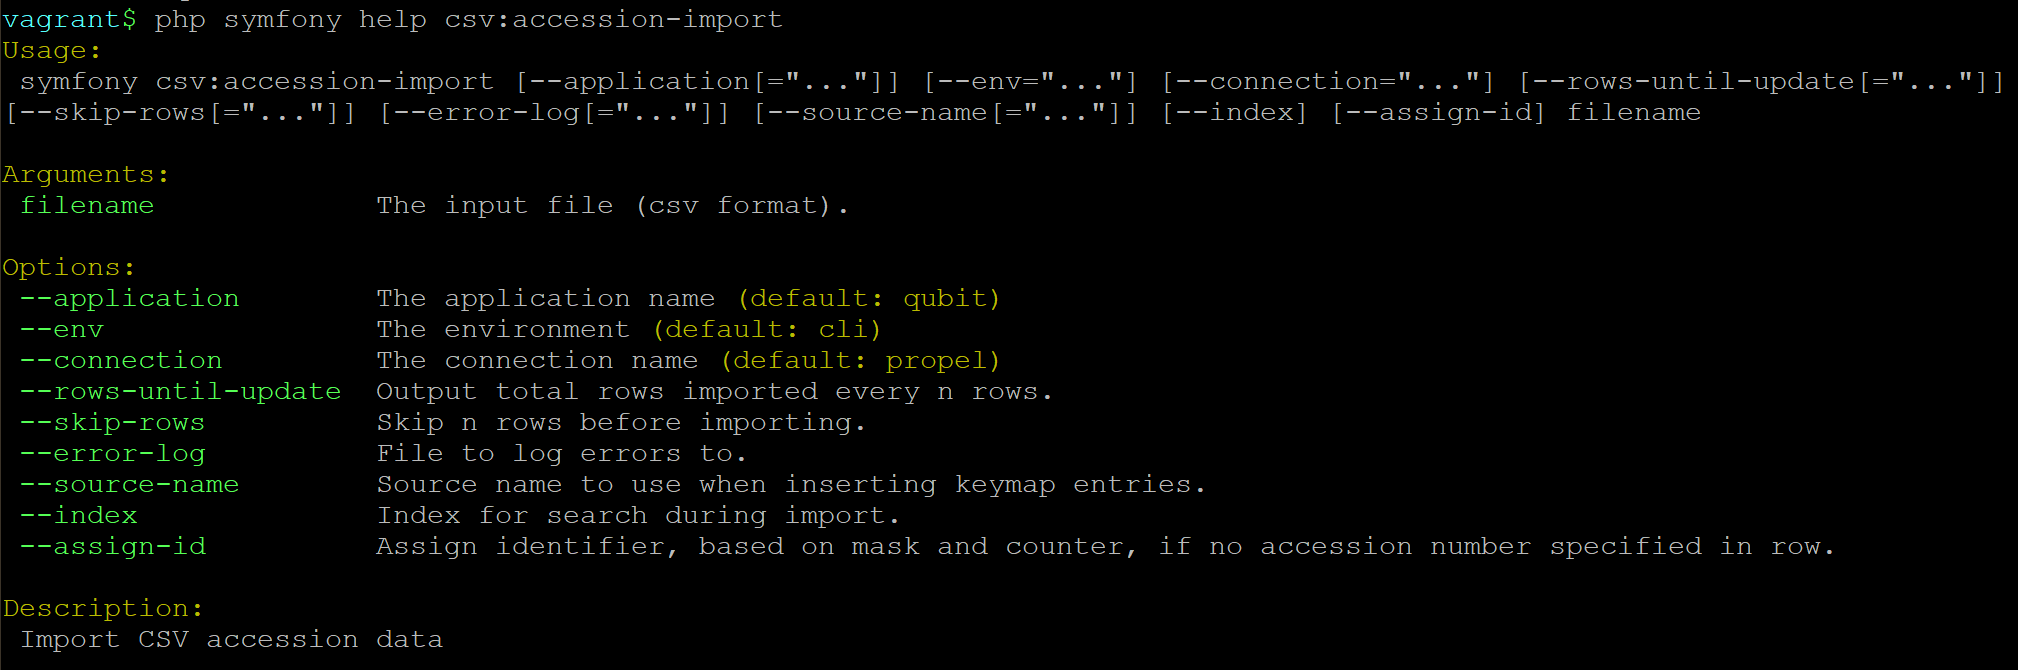 An image of the command-line options for accession record imports